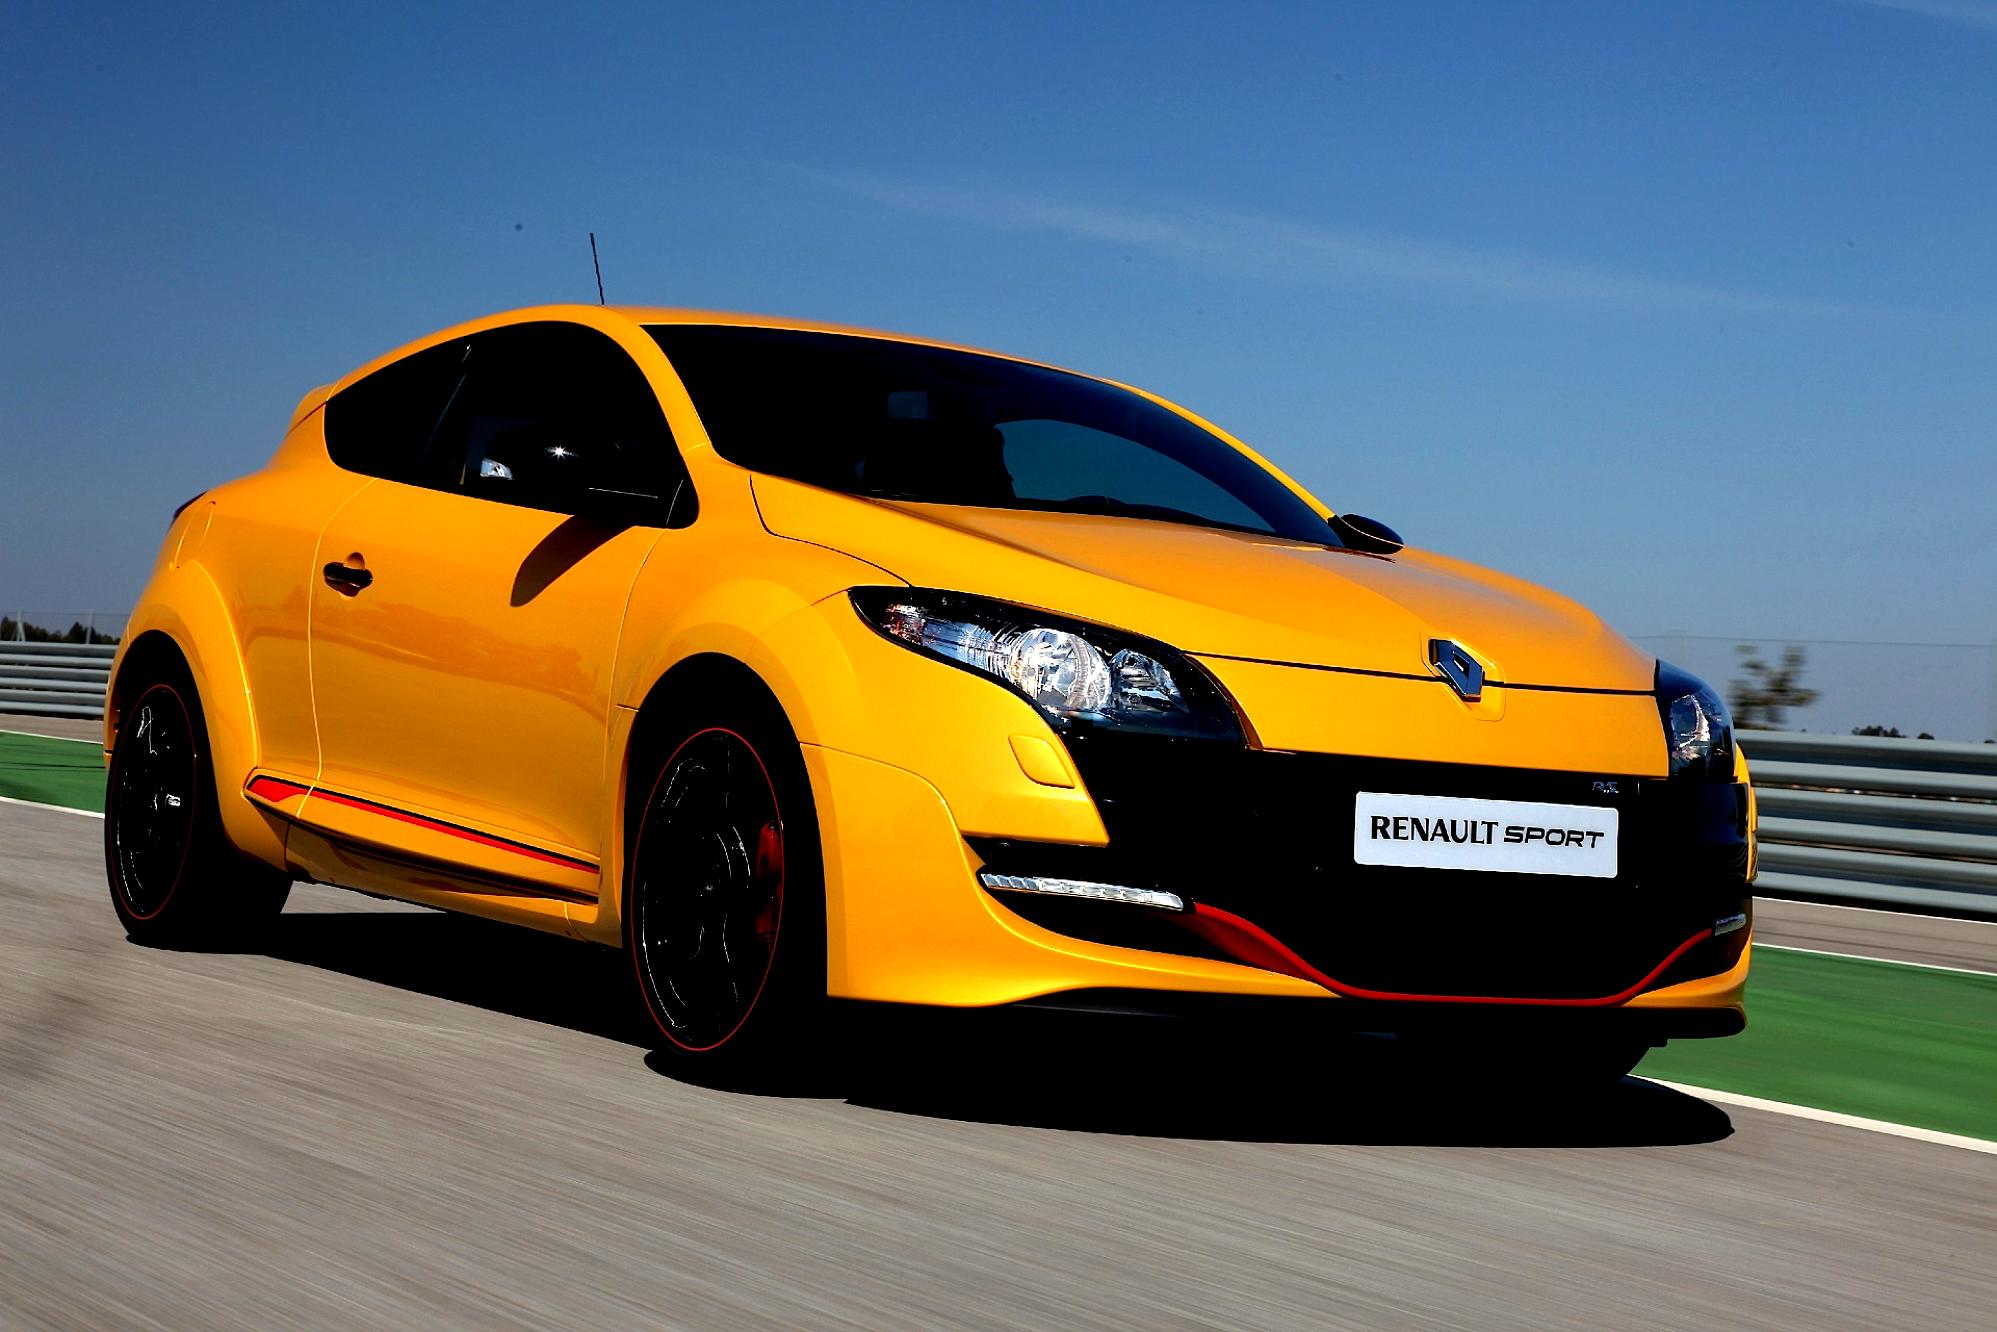 Renault Megane RS Coupe 2009 #55